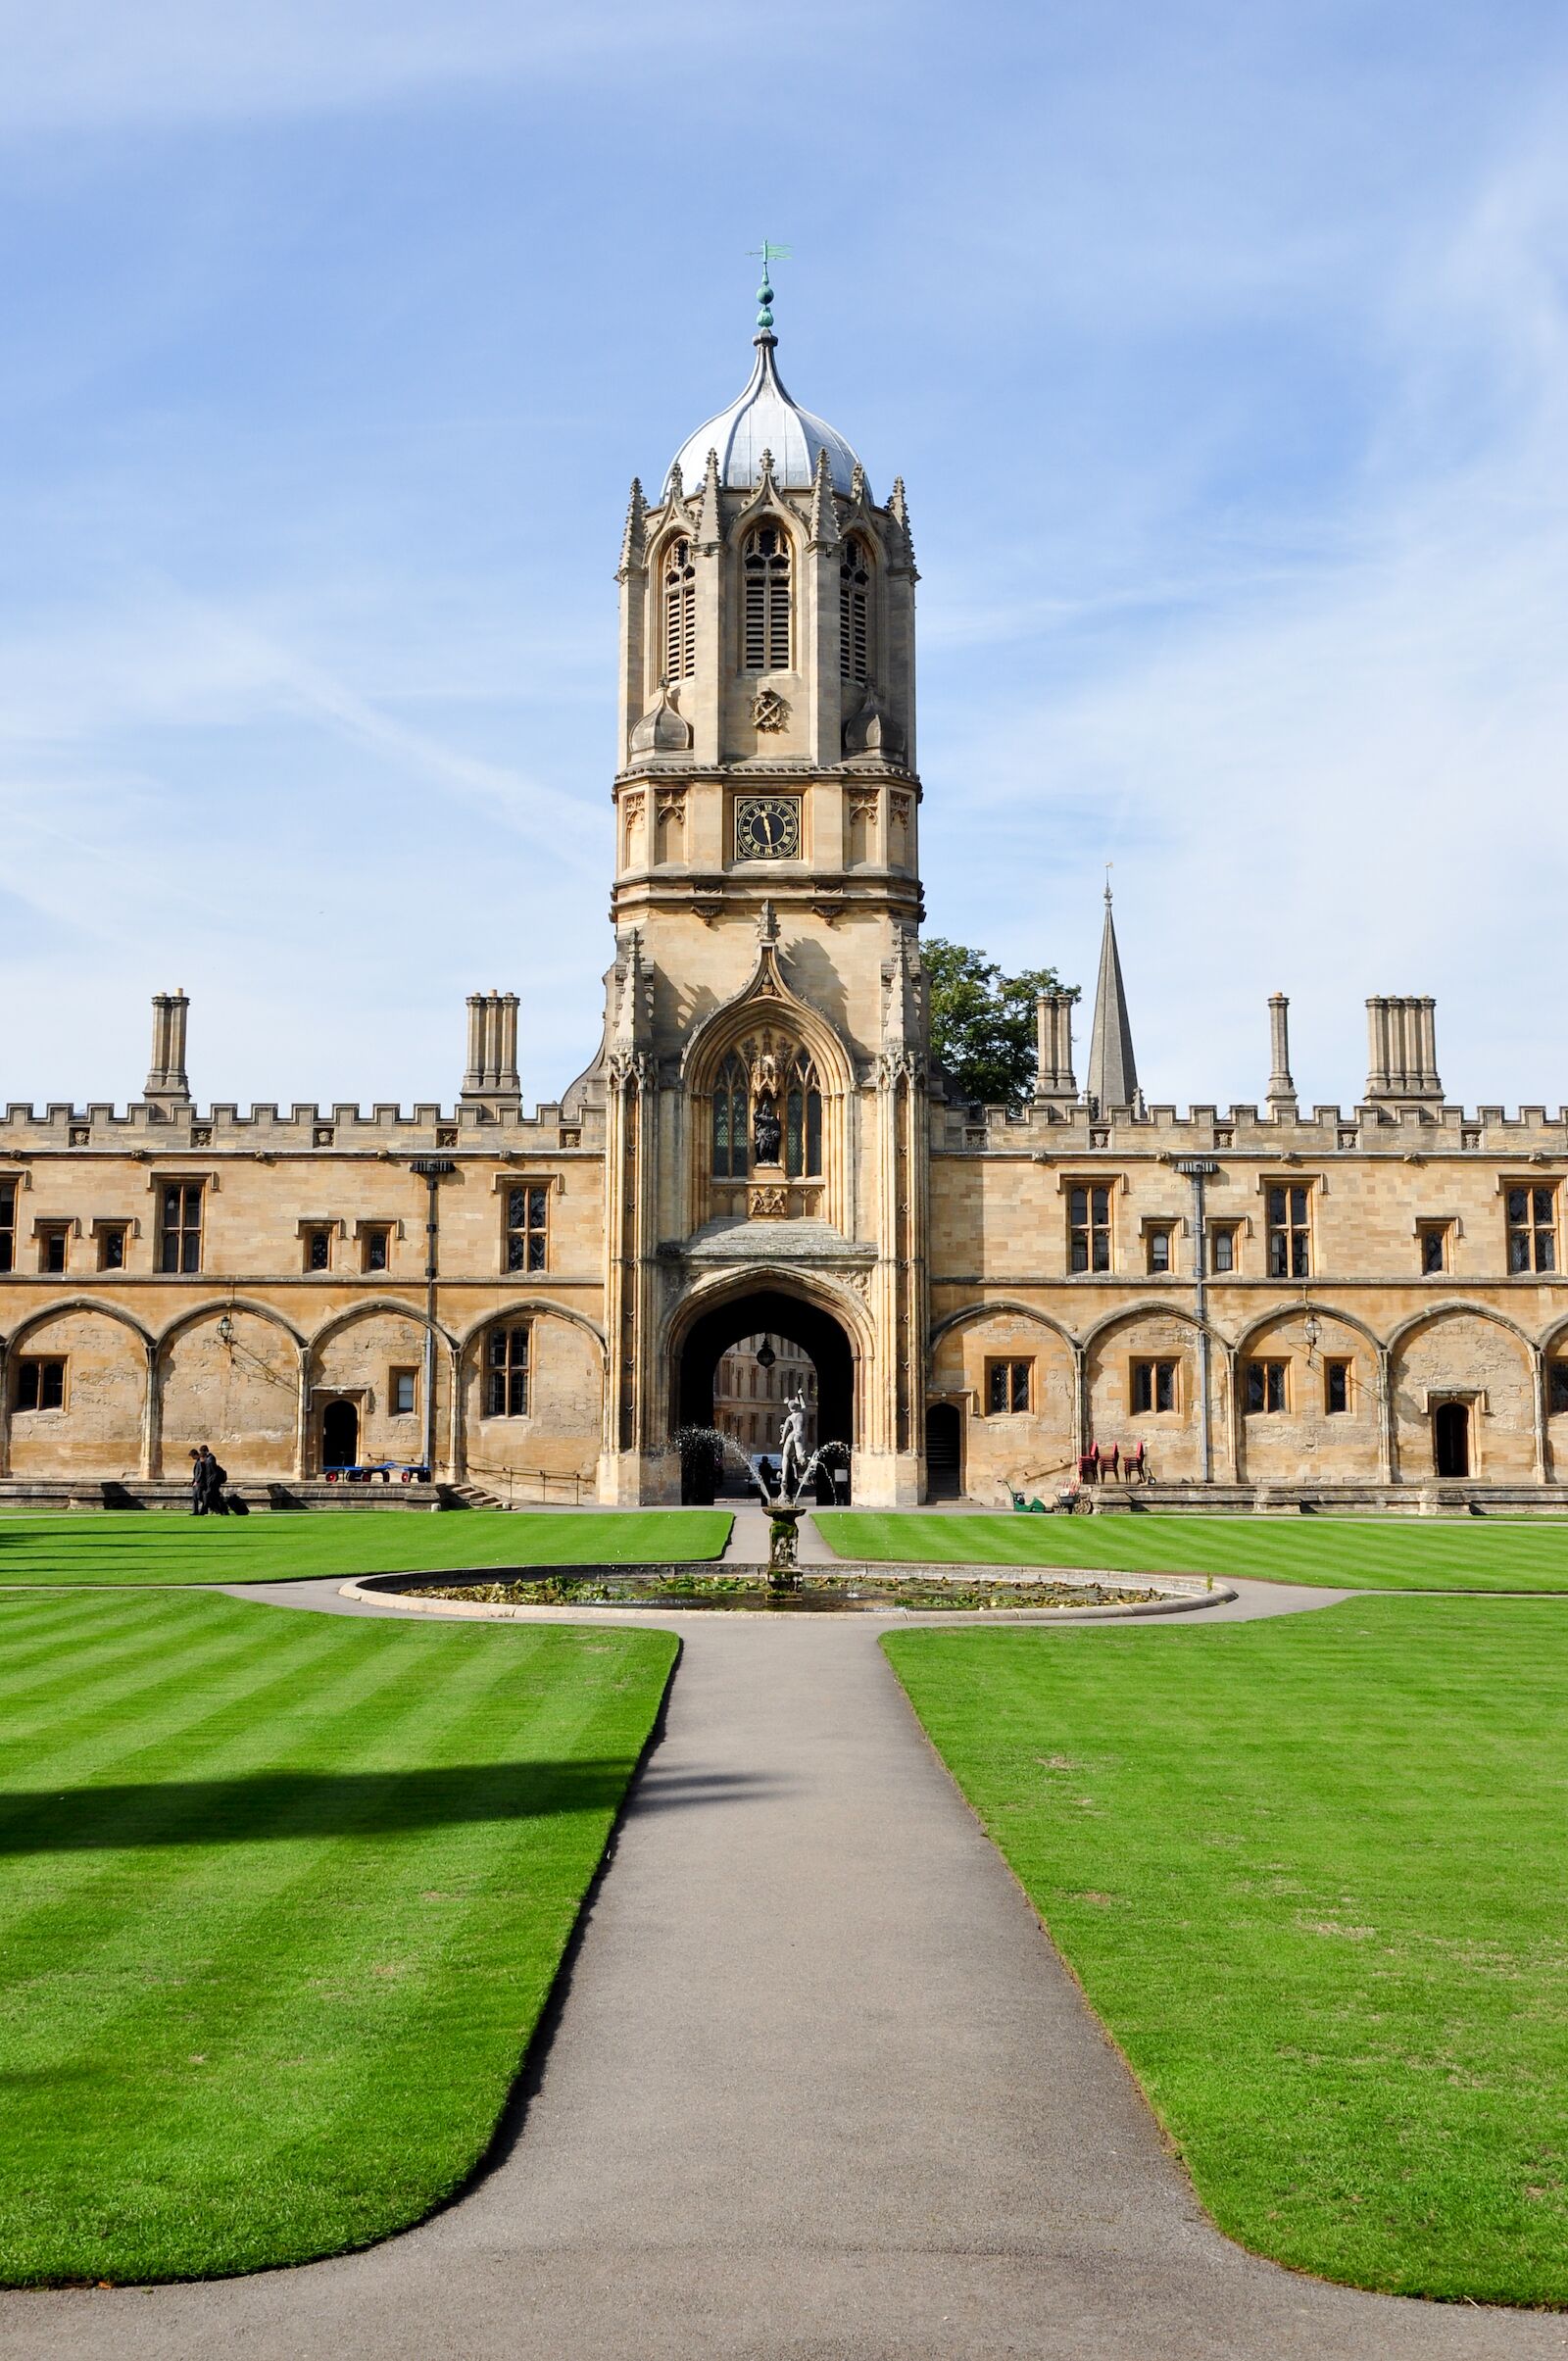 Things to do in Oxford: Visiting Christ Church College